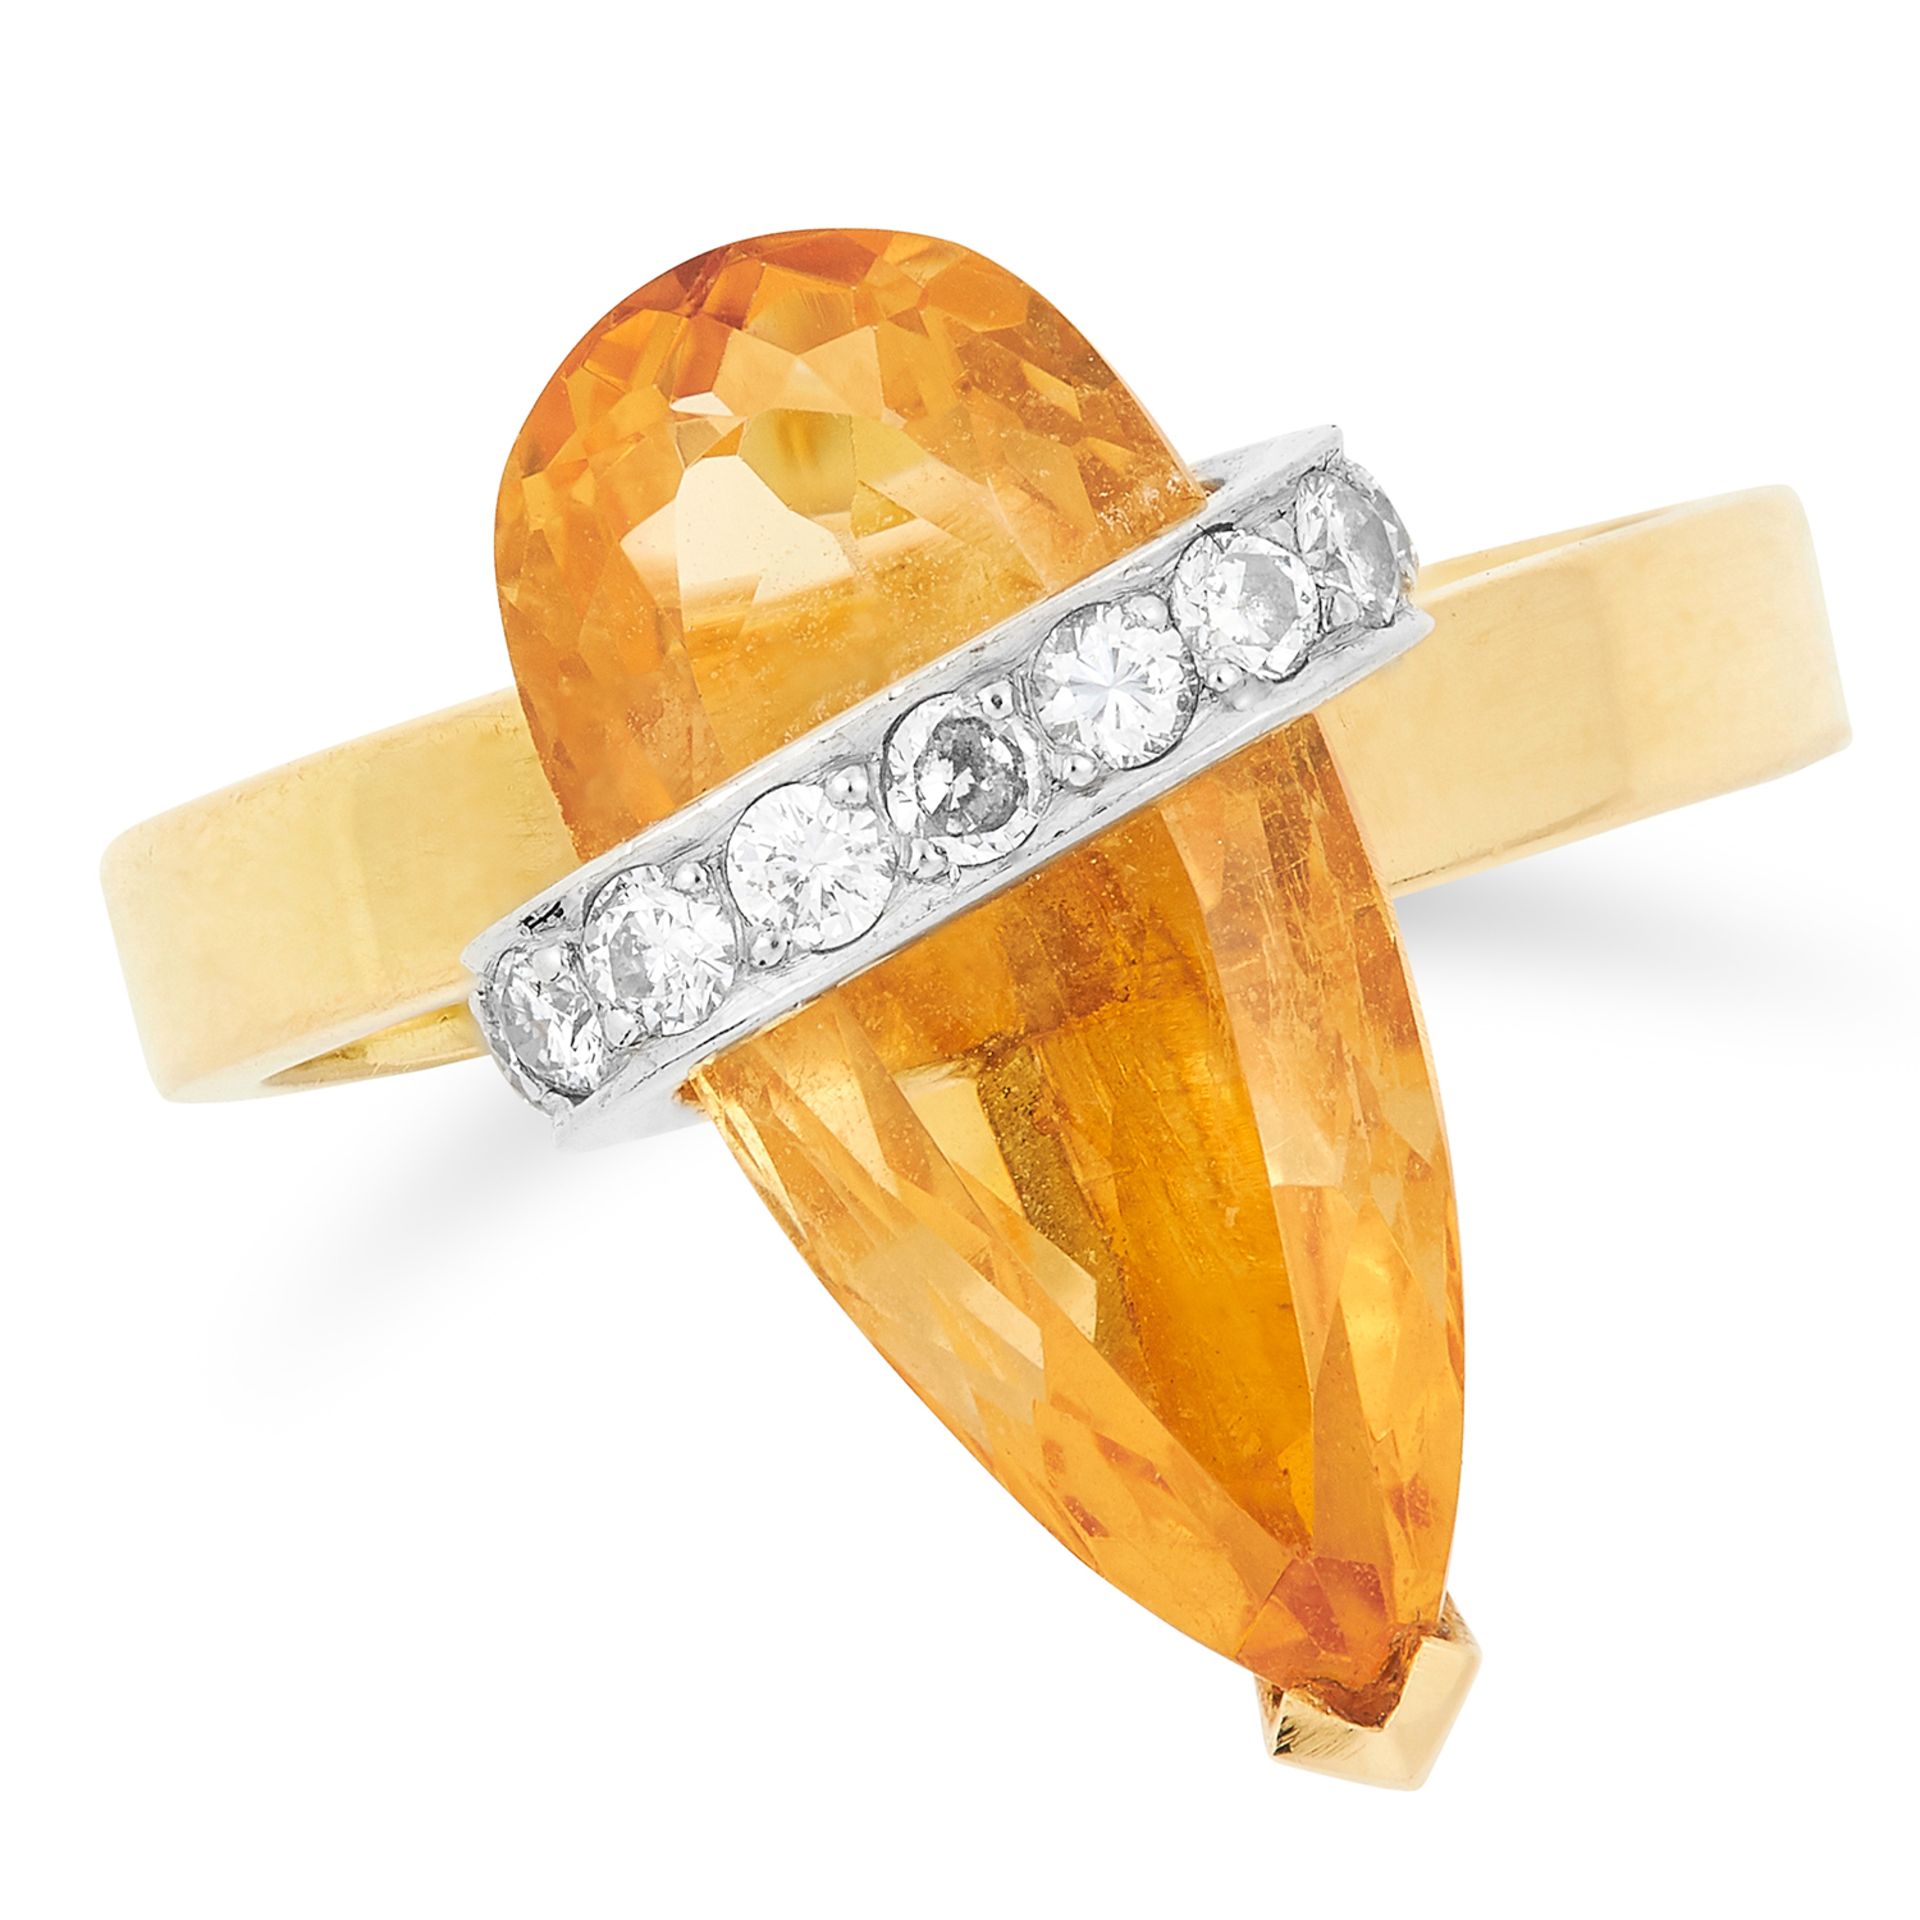 A TOPAZ AND DIAMOND RING, ANDREW GRIMA, CIRCA 1975 set with a pear cut imperial topaz and round